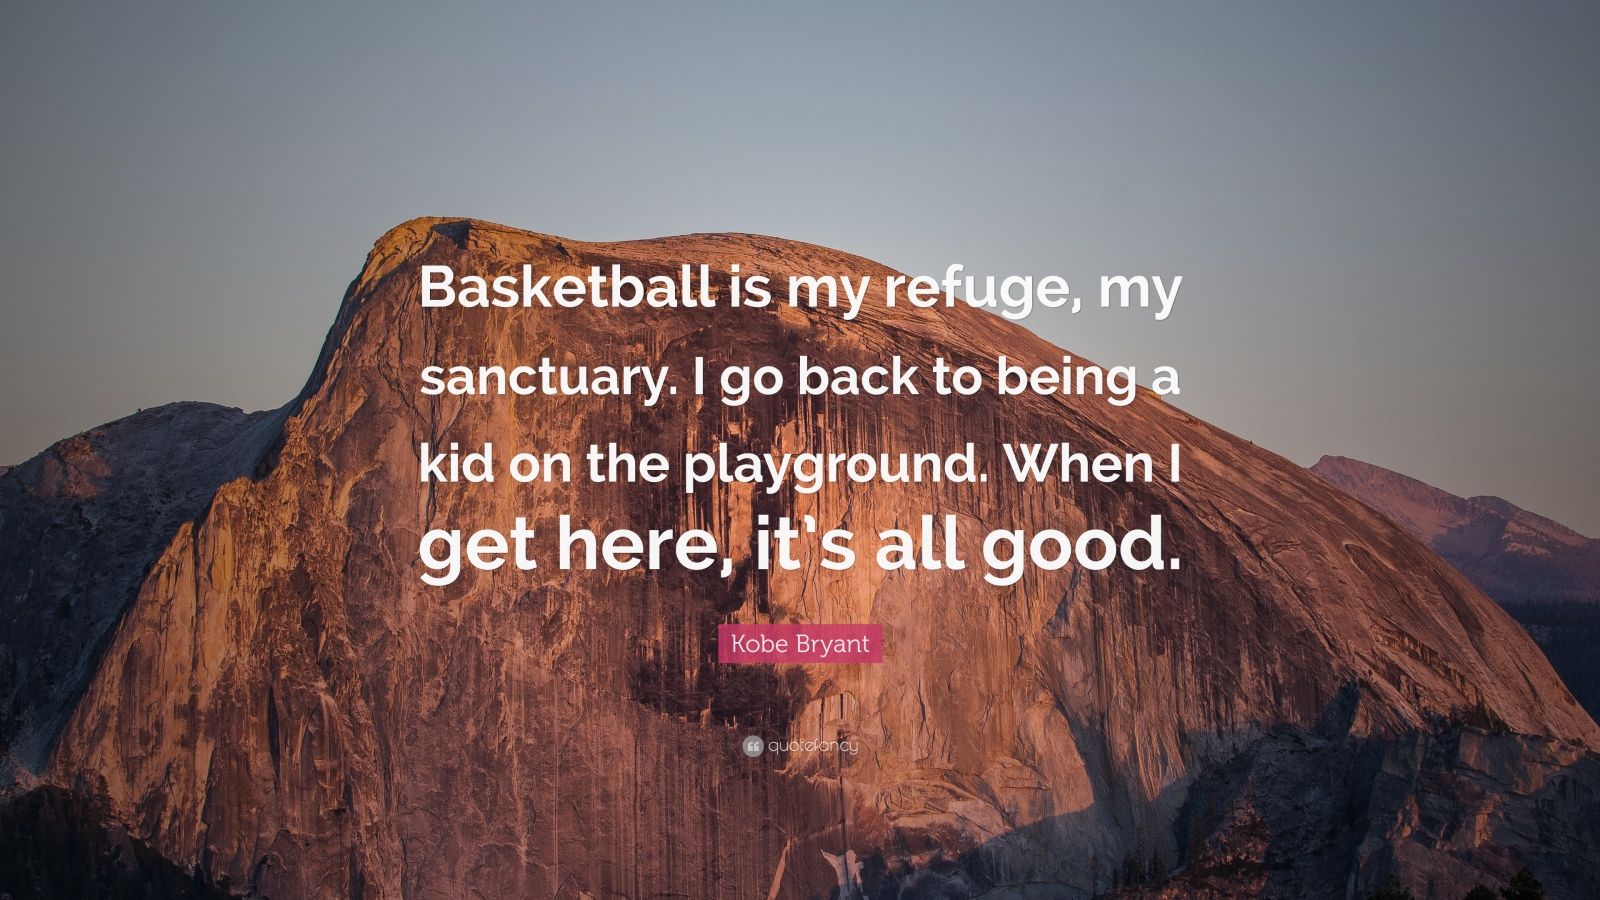 Kobe Bryant Quote: "Basketball is my refuge, my sanctuary. I go back to being a kid on the ...